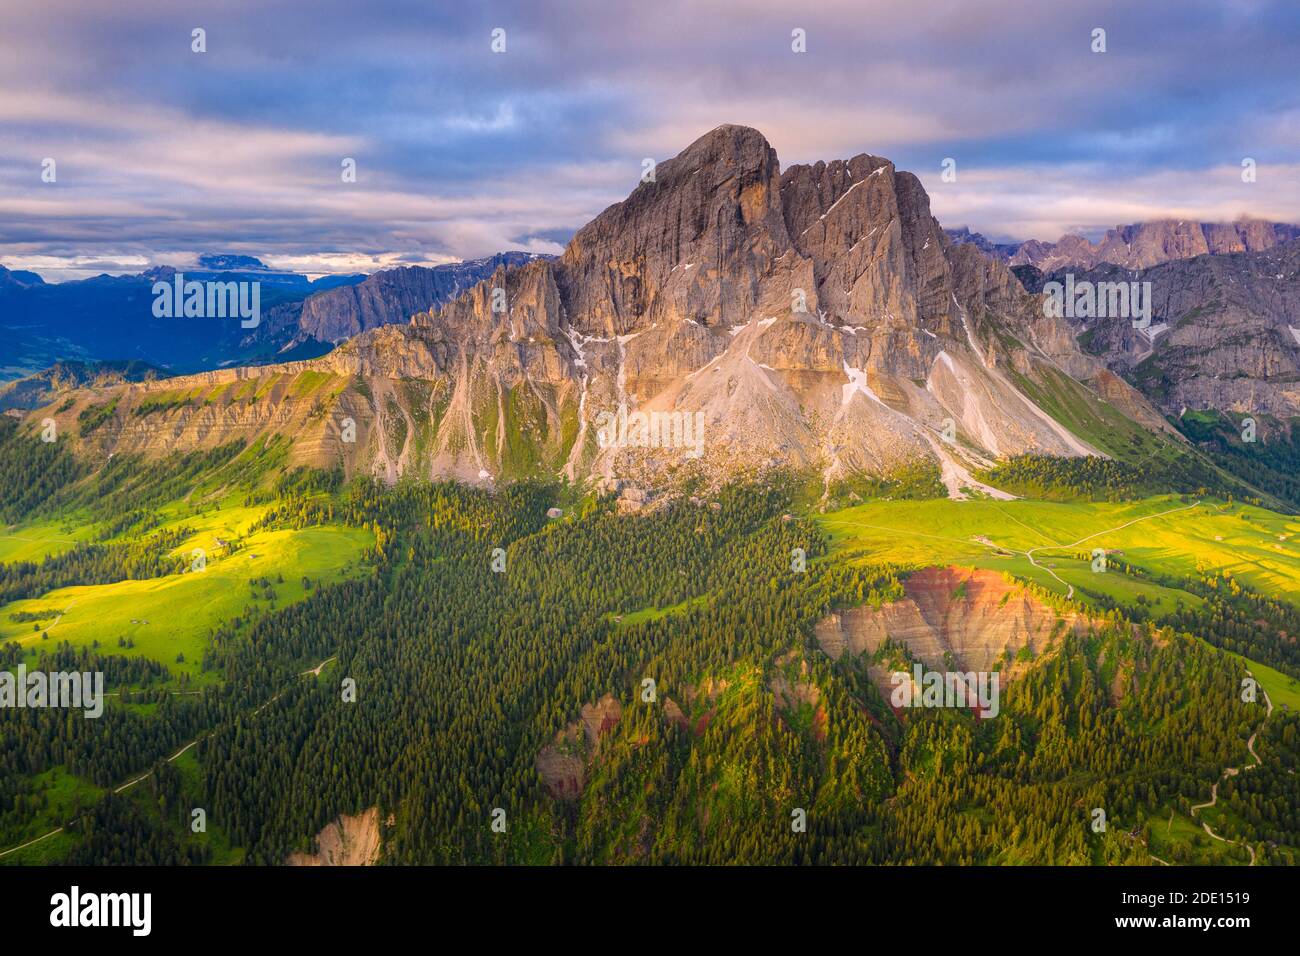 Aerial view of Sass De Putia (Peitlerkofel) and canyon surrounded by woods, Passo Delle Erbe, Dolomites, South Tyrol, Italy, Europe Stock Photo